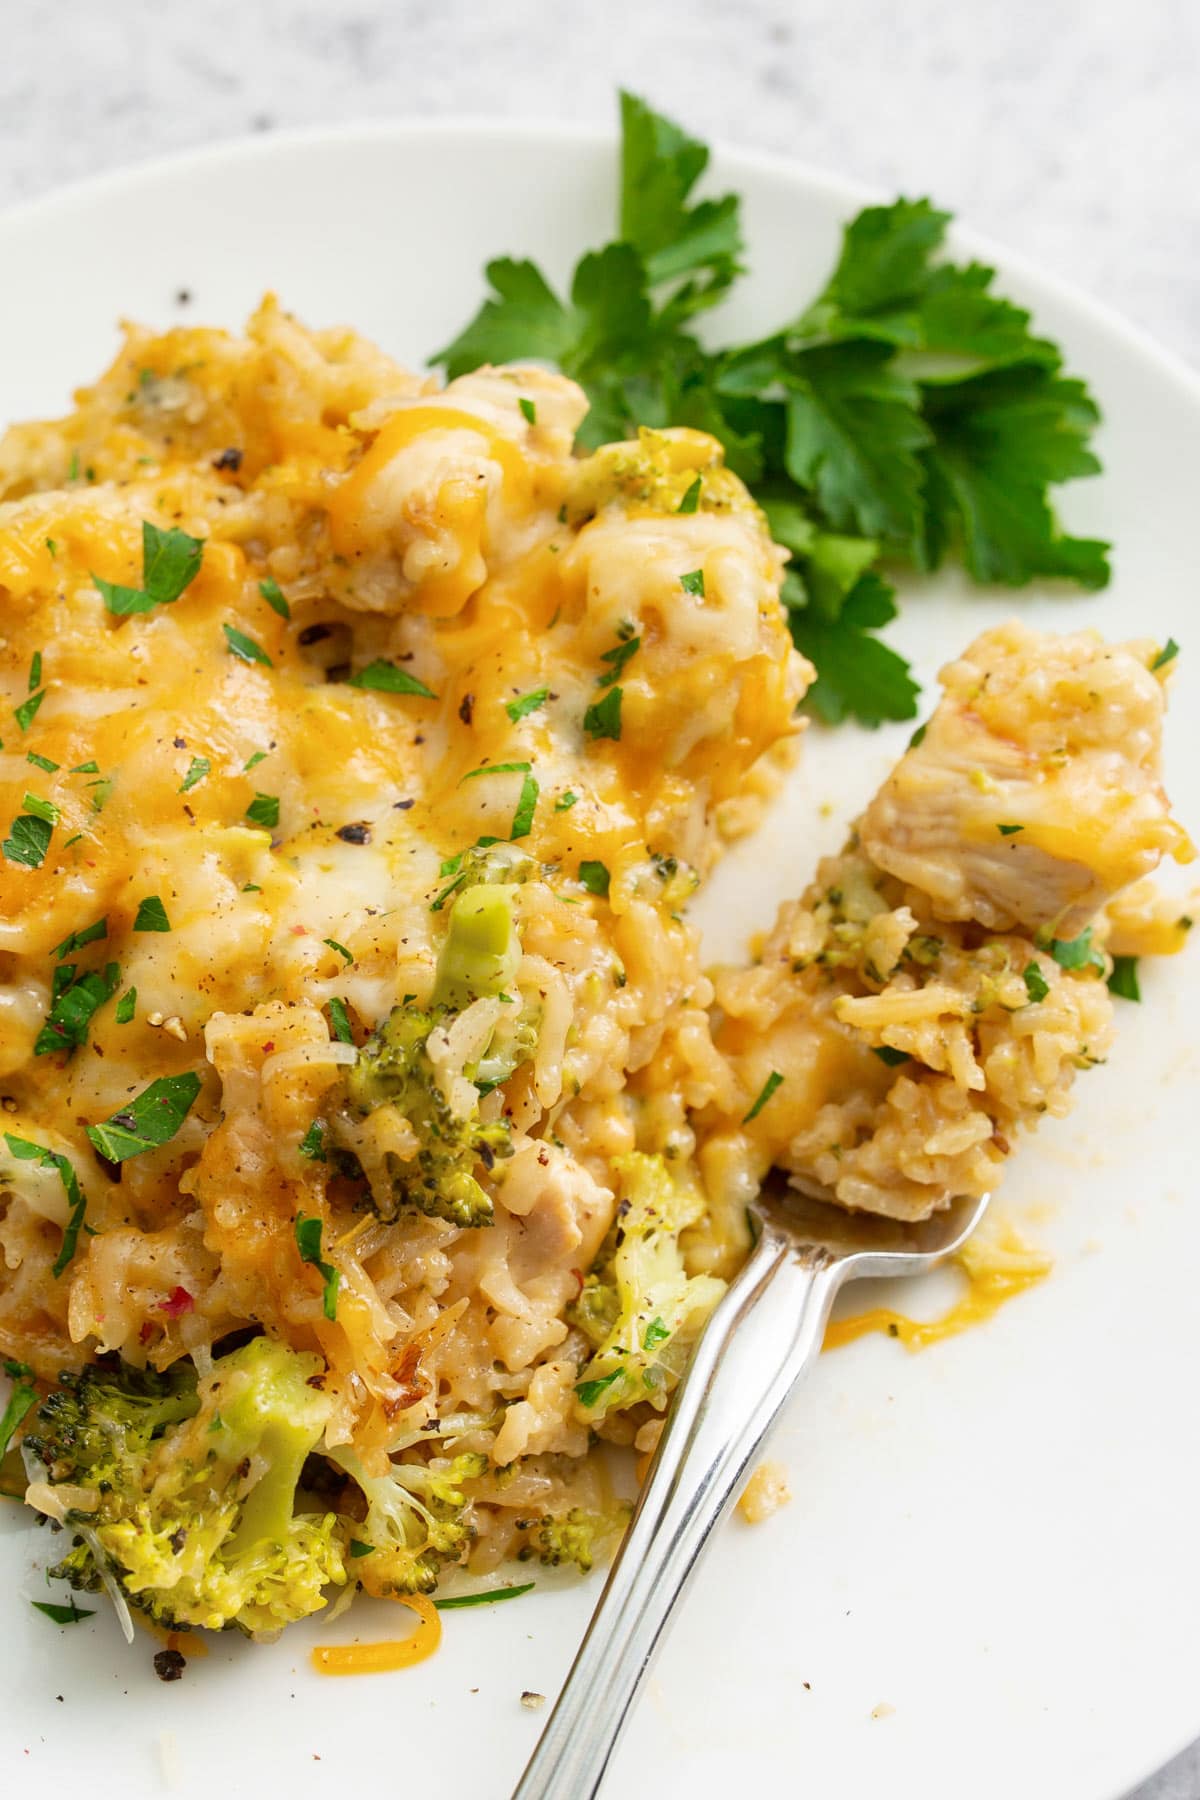 A generous serving of chicken broccoli rice casserole on a white plate topped with fresh parsley.